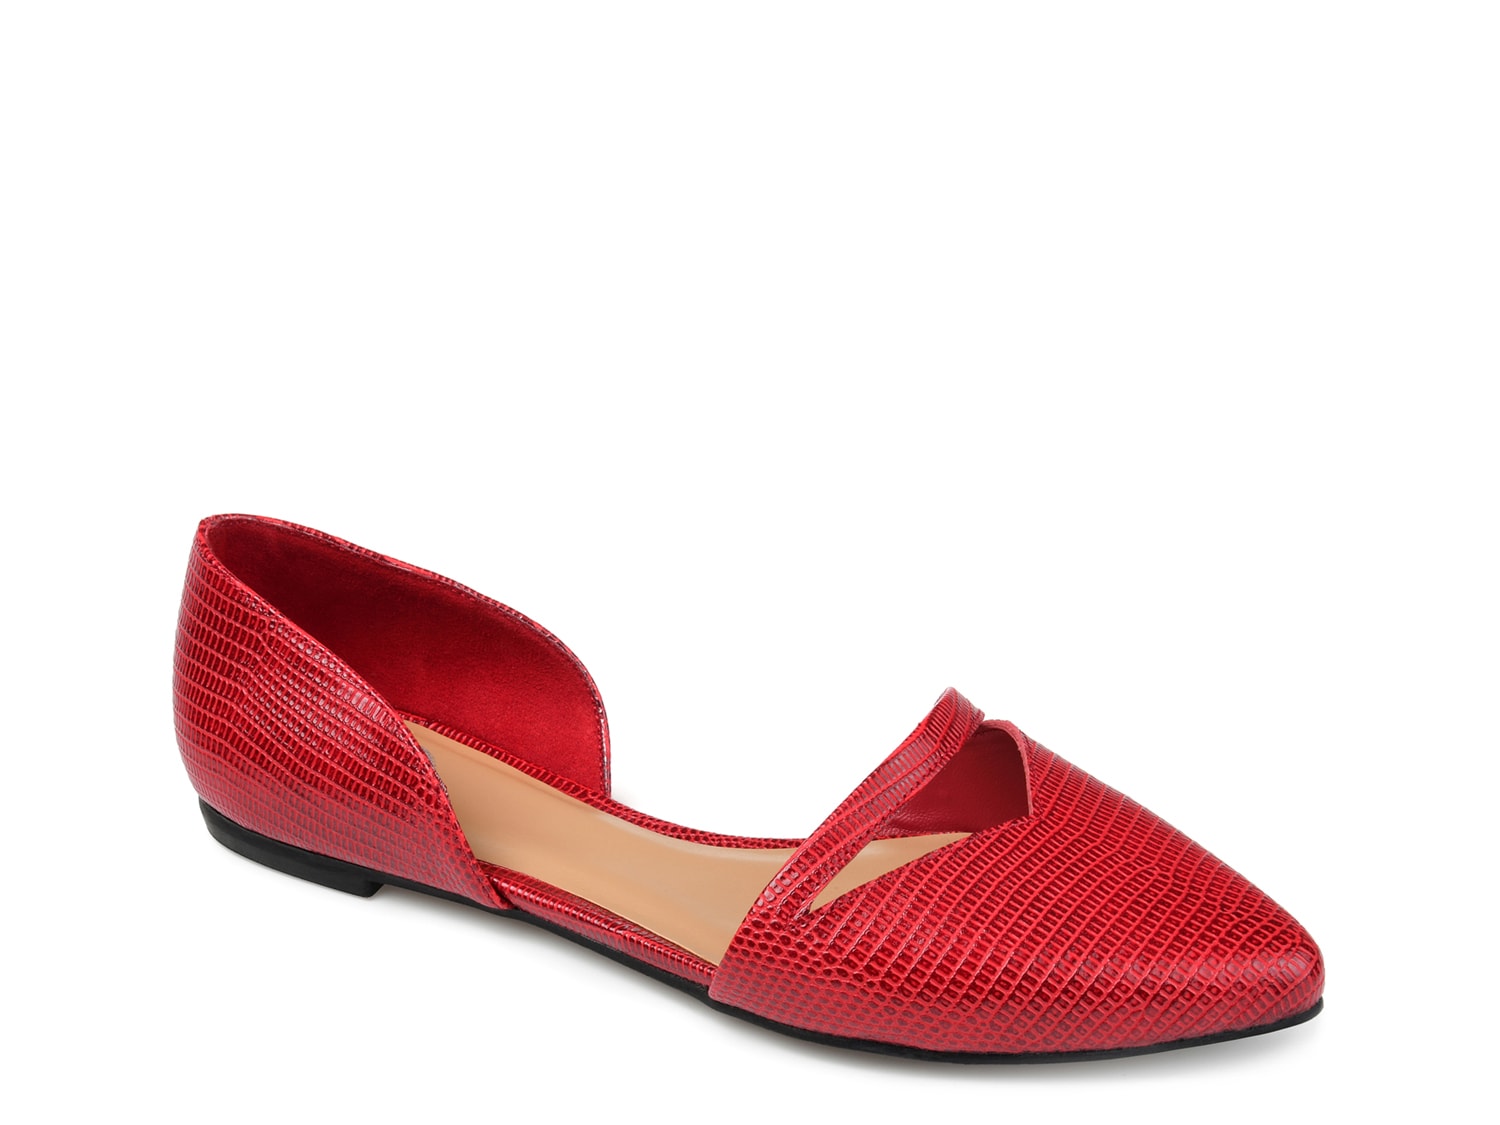 Journee Collection Braely Flat - Free Shipping | DSW